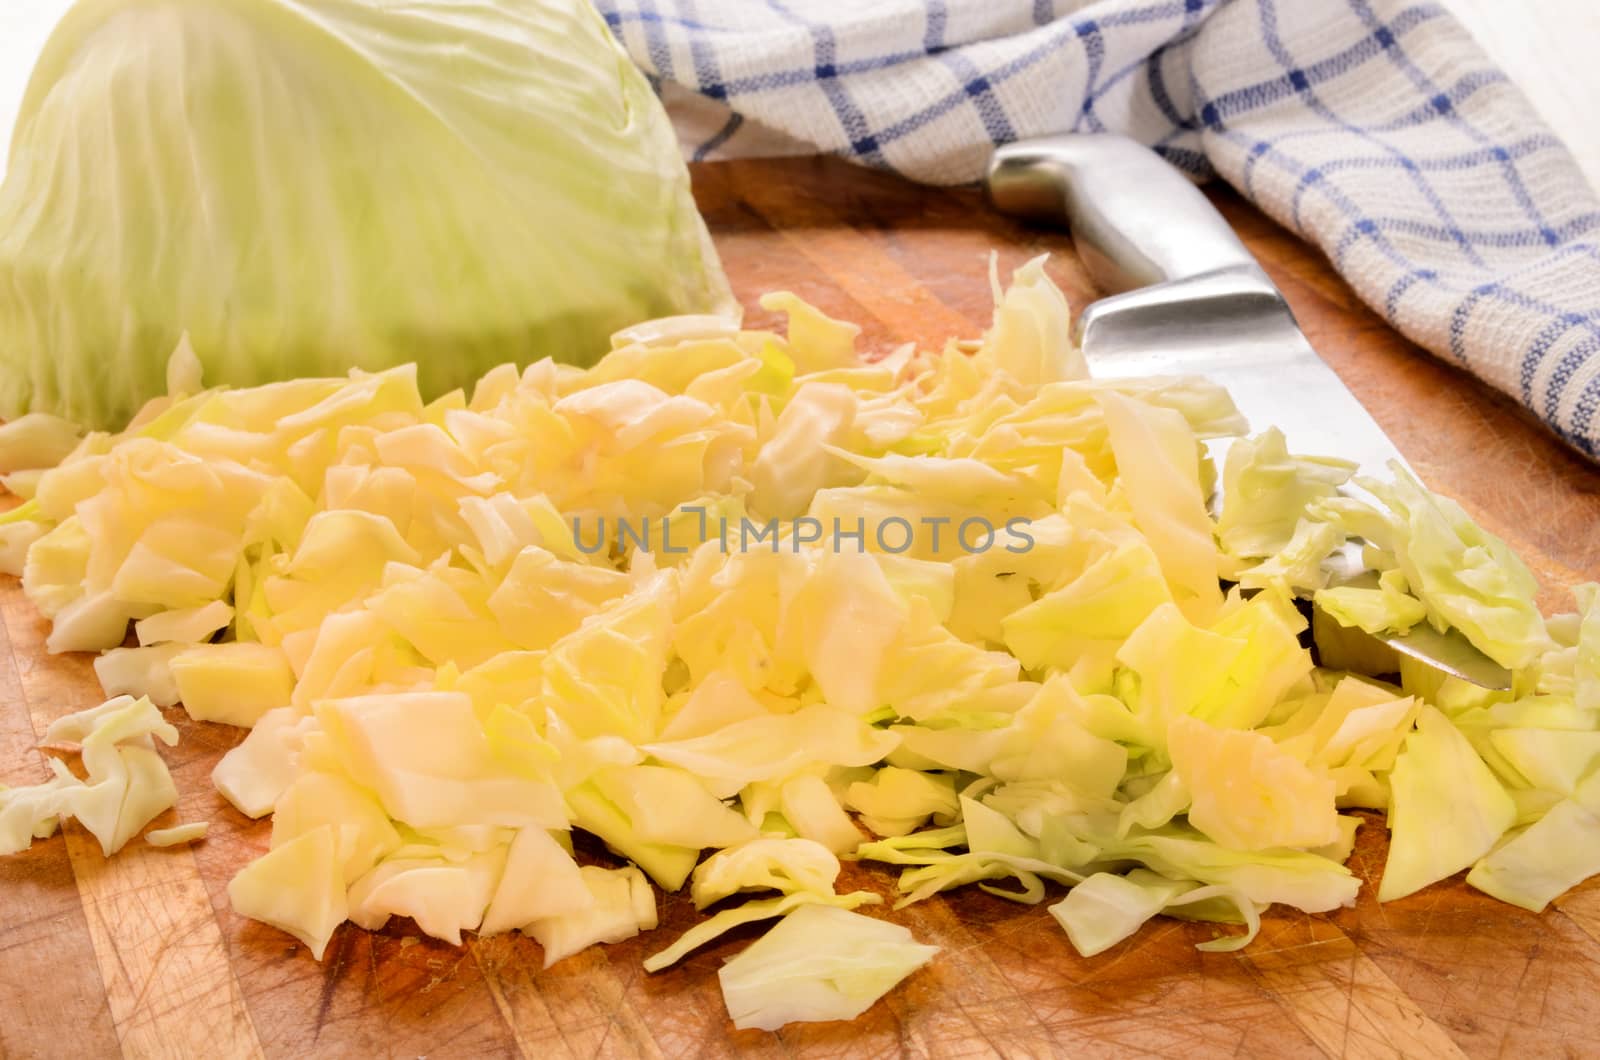 finely chopped white cabbage on a wooden board and knife